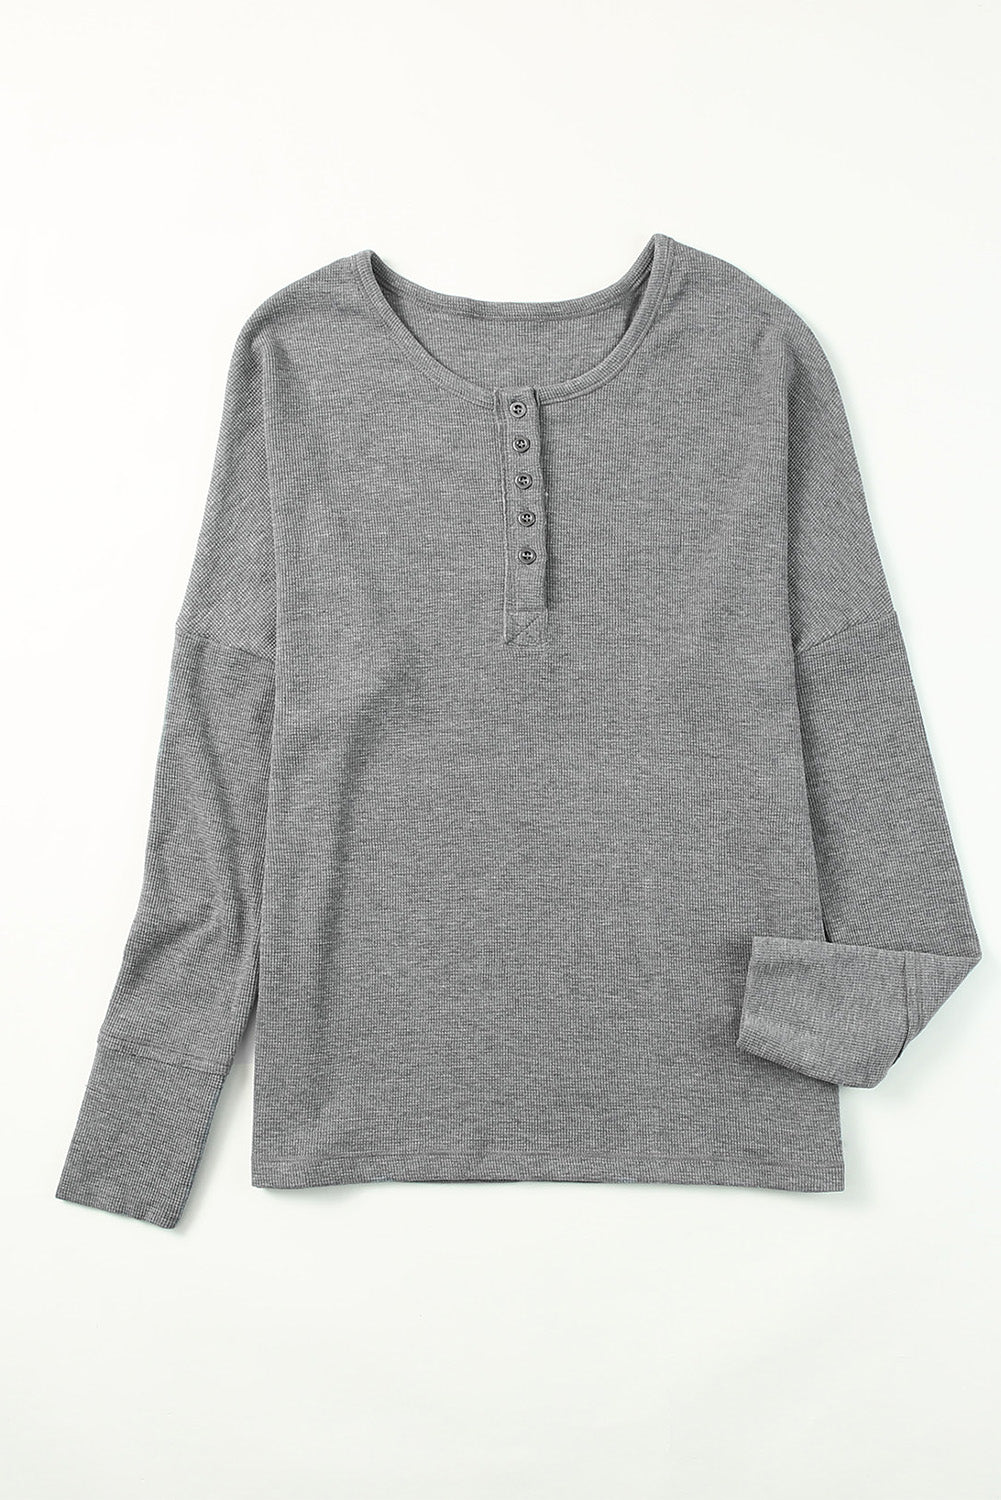 Black Waffle Casual Button Front Knit Henley Top